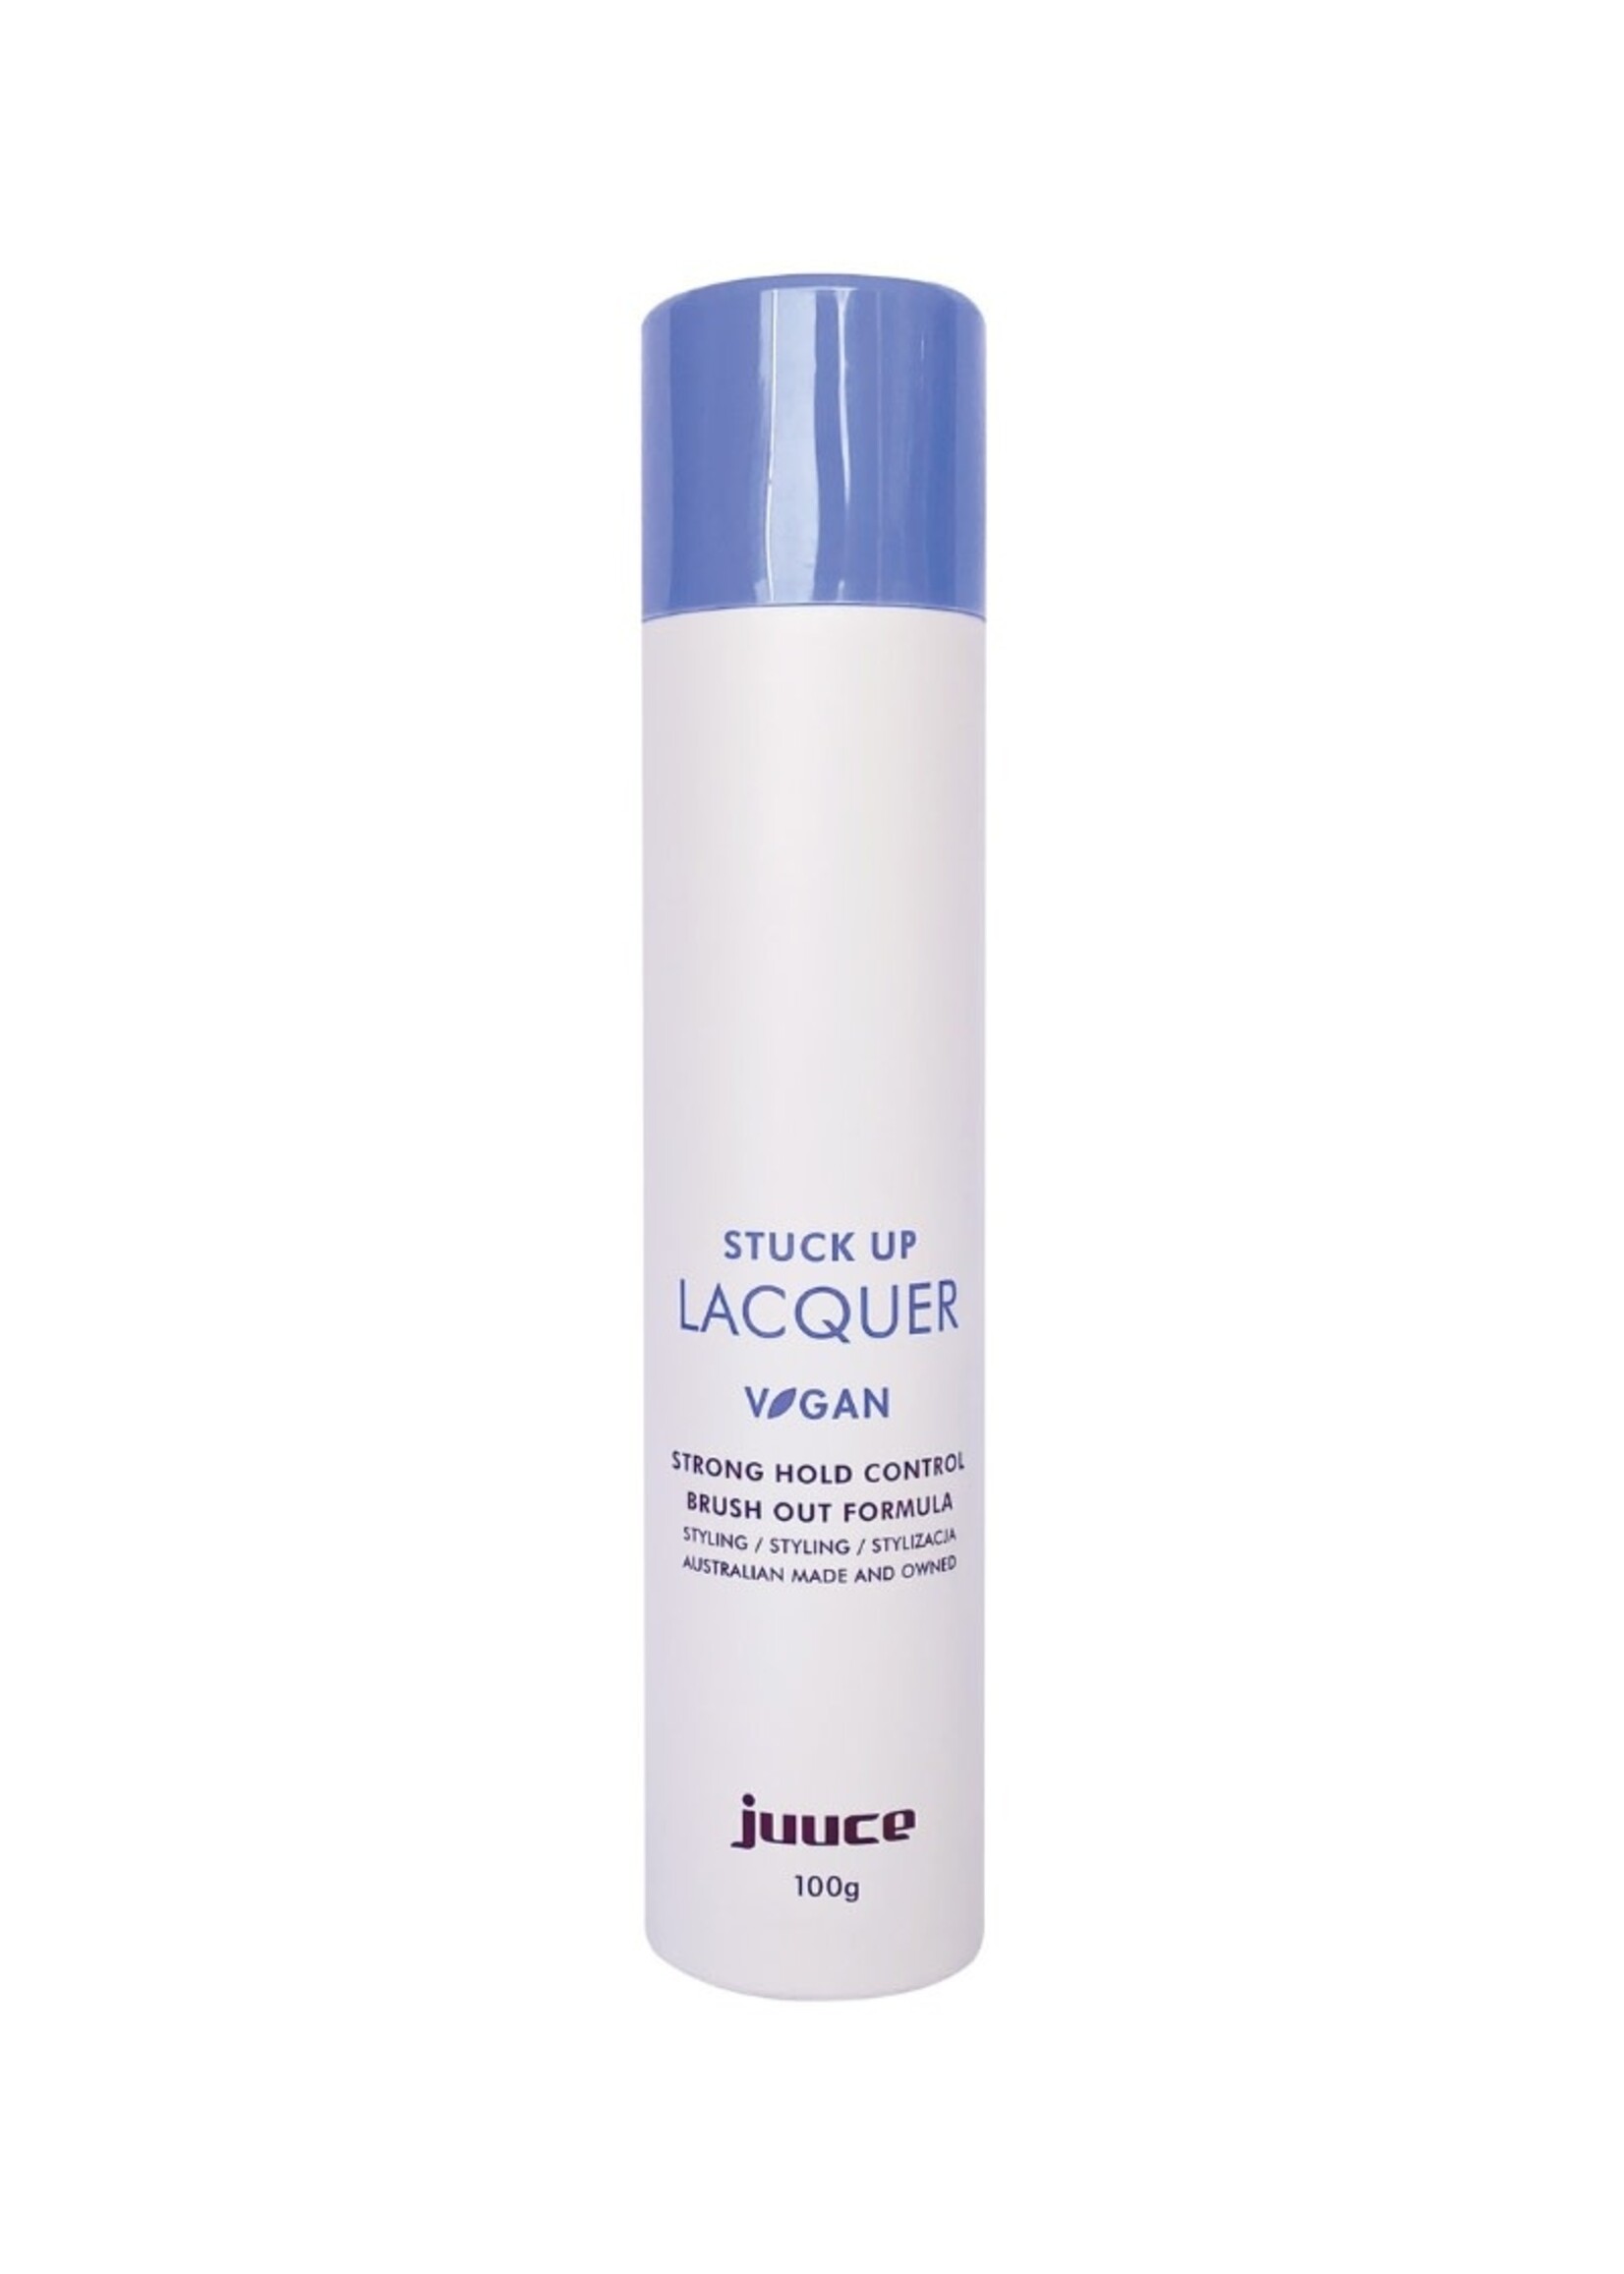 Juuce Juuce Stuck Up Lacquer 100g